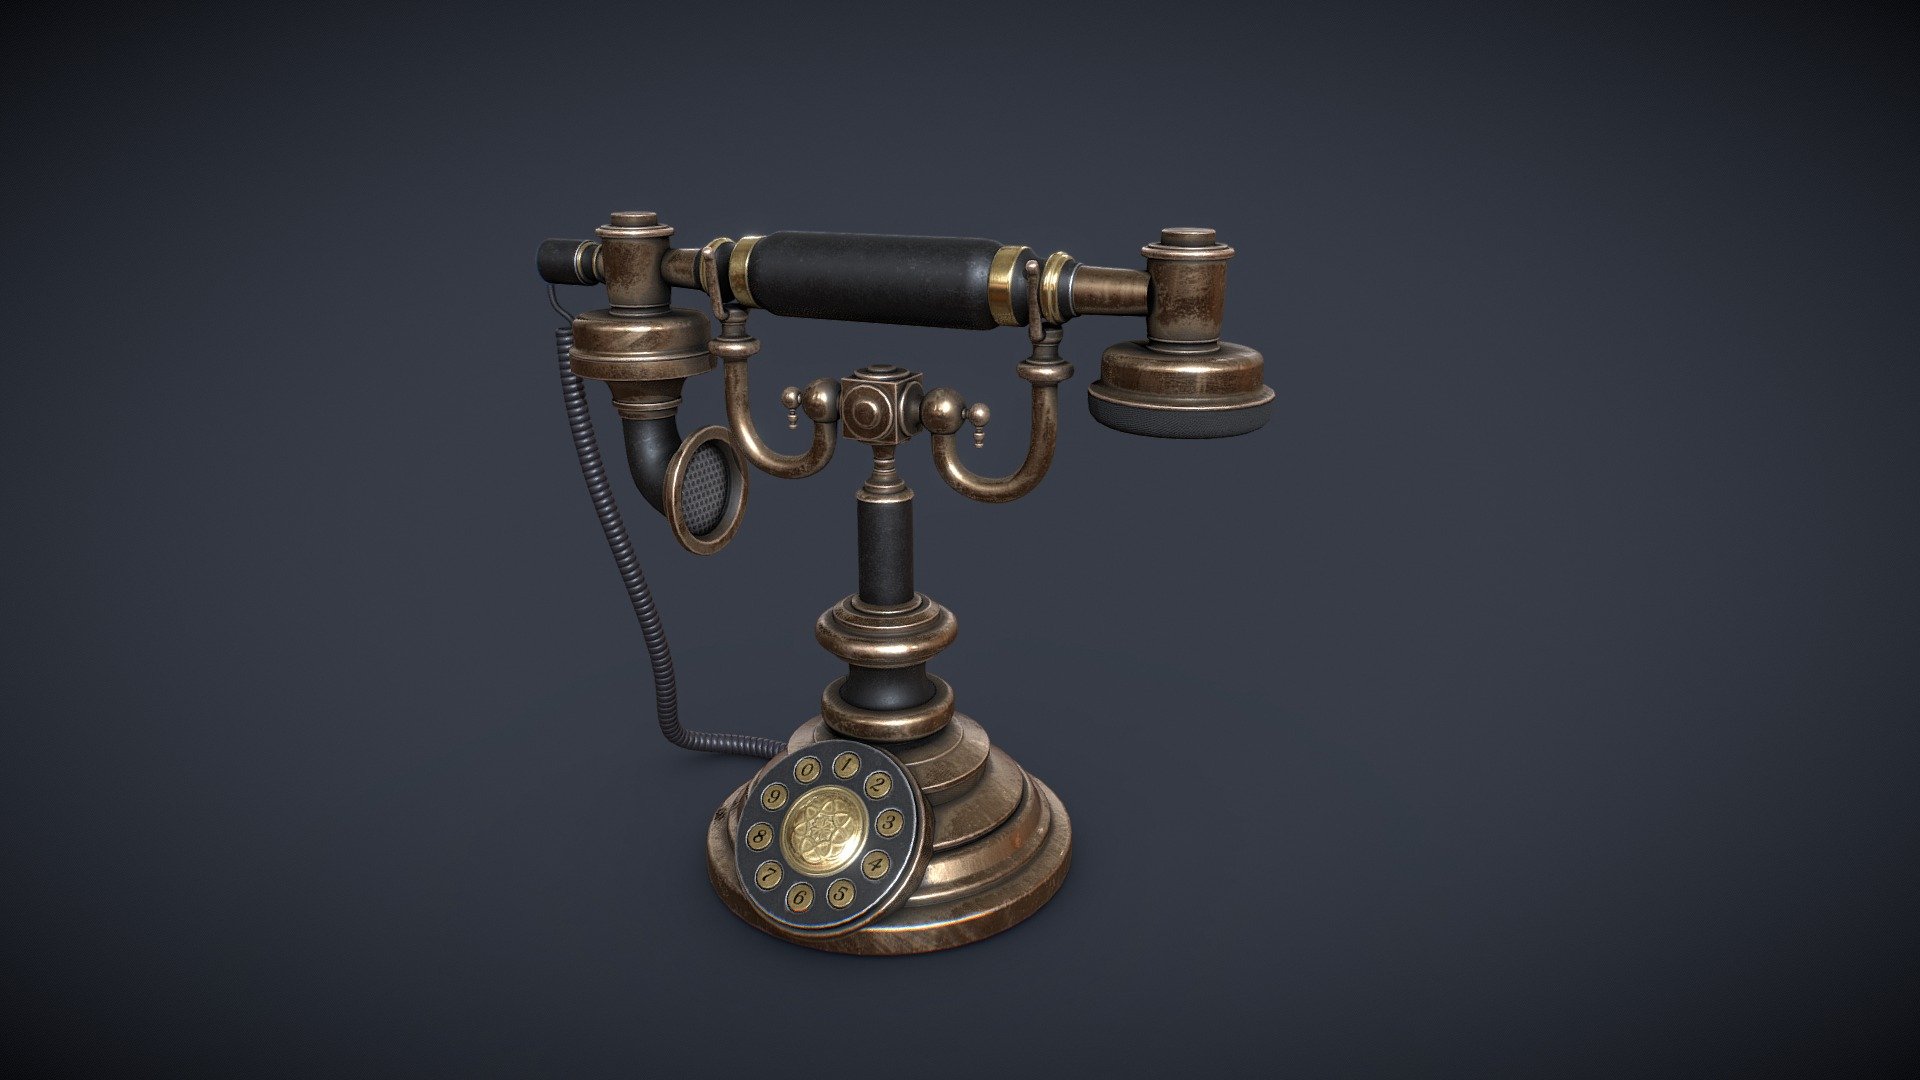 Hello all :) To complete my victorian project objects collection, there is an antique copper phone :)

Made with Maya, PS and Substance.

You will find in the package Scene file, FBX and 4k Textures.
If you have any customs need, please feel free to contact me 3d model